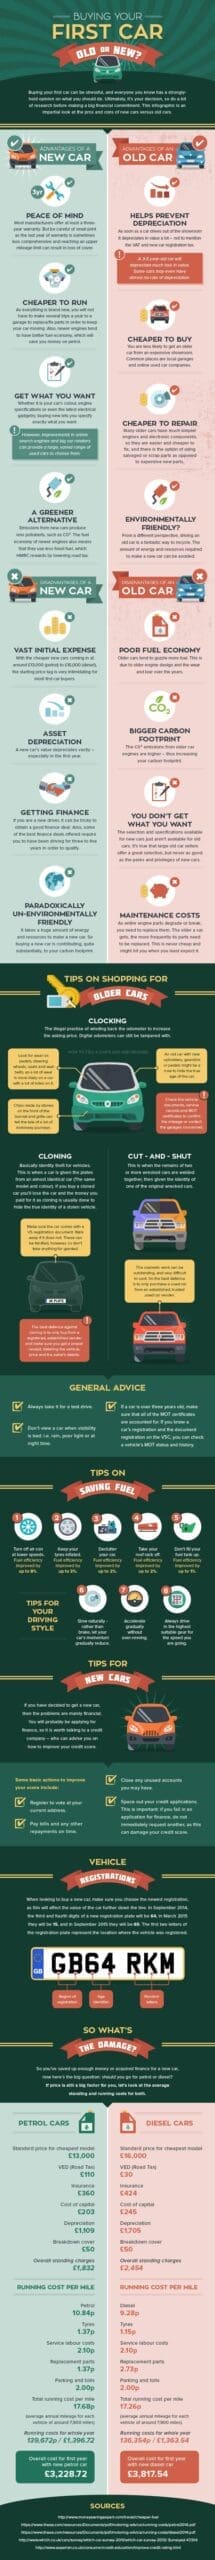 What to Know When Buying Your First Car